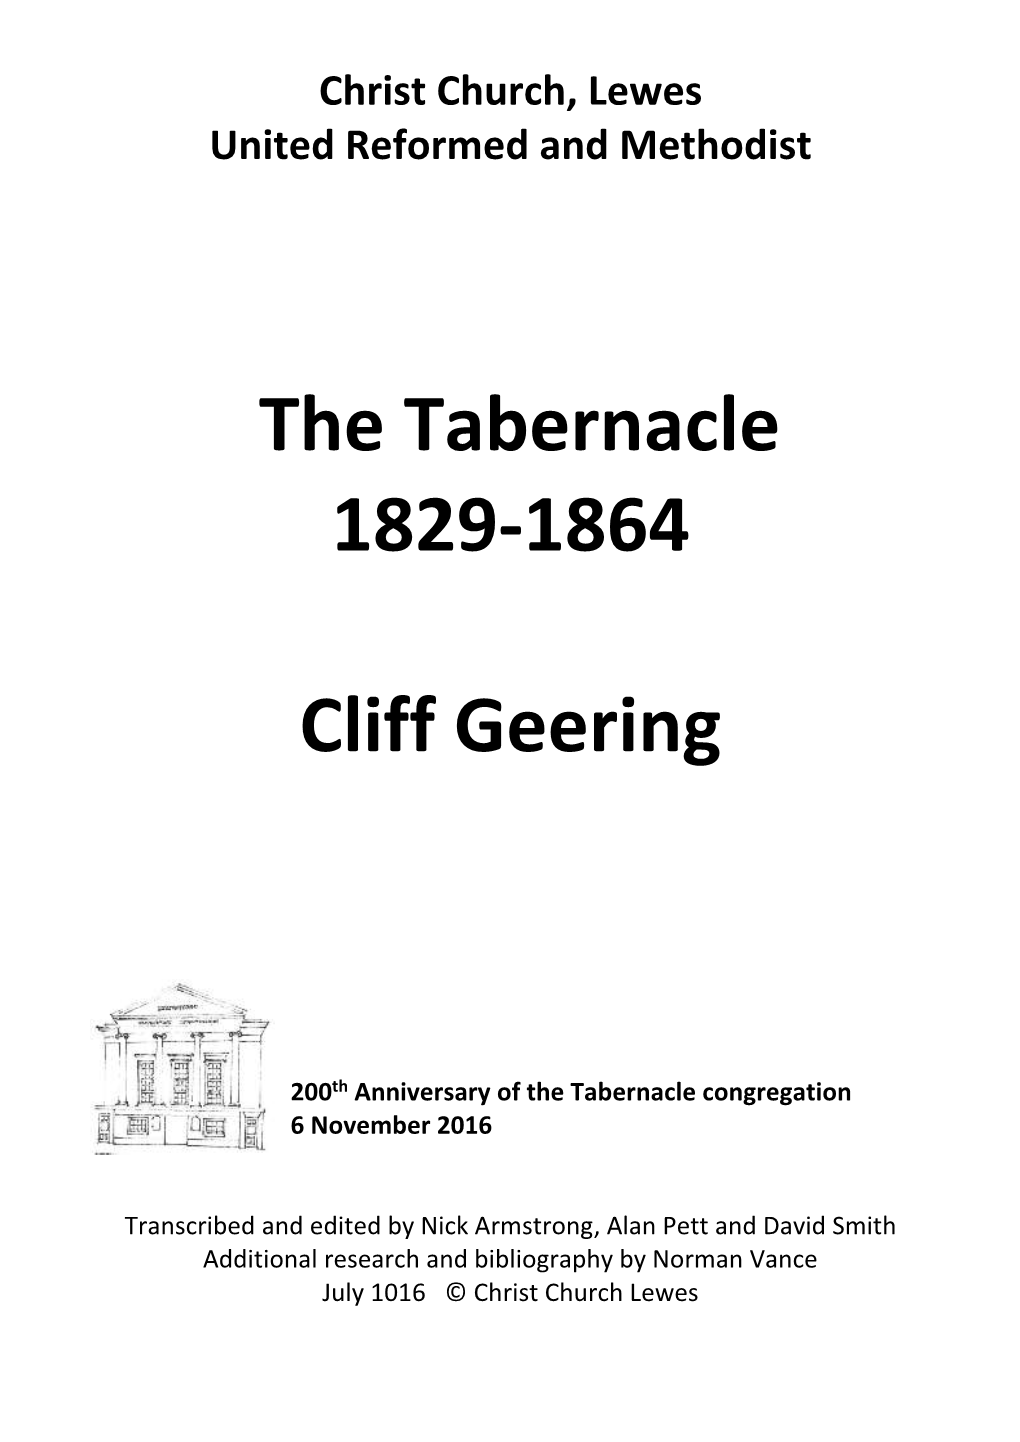 The Tabernacle 1829-1864